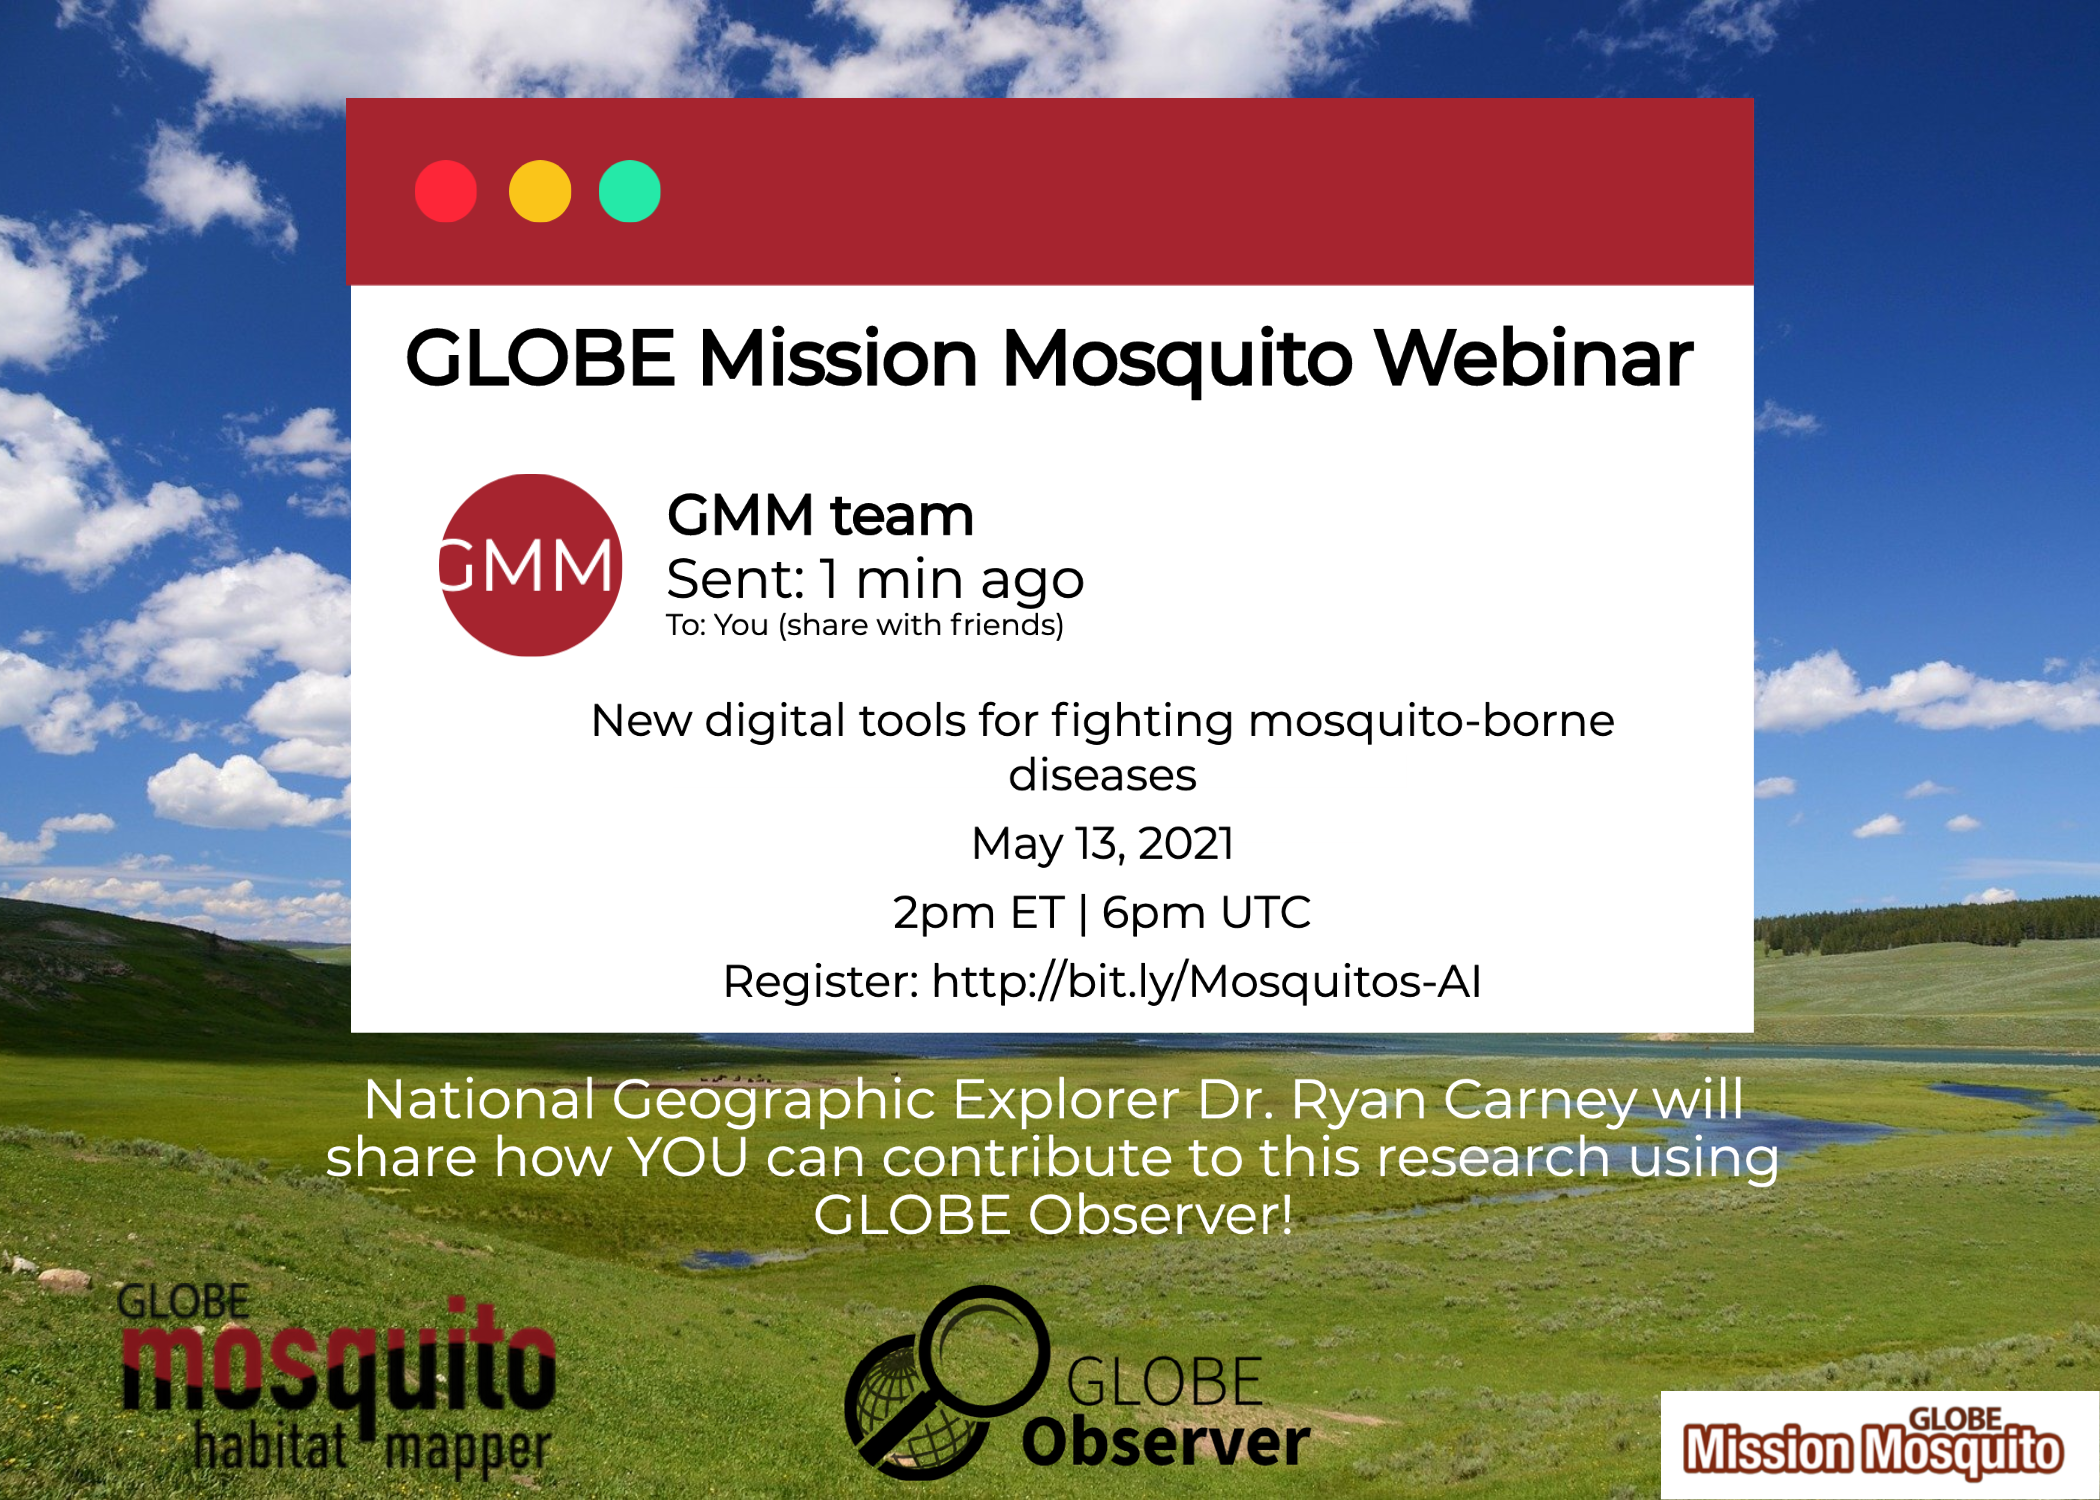 GLOBE Mission Mosquito 13 May webinar shareable